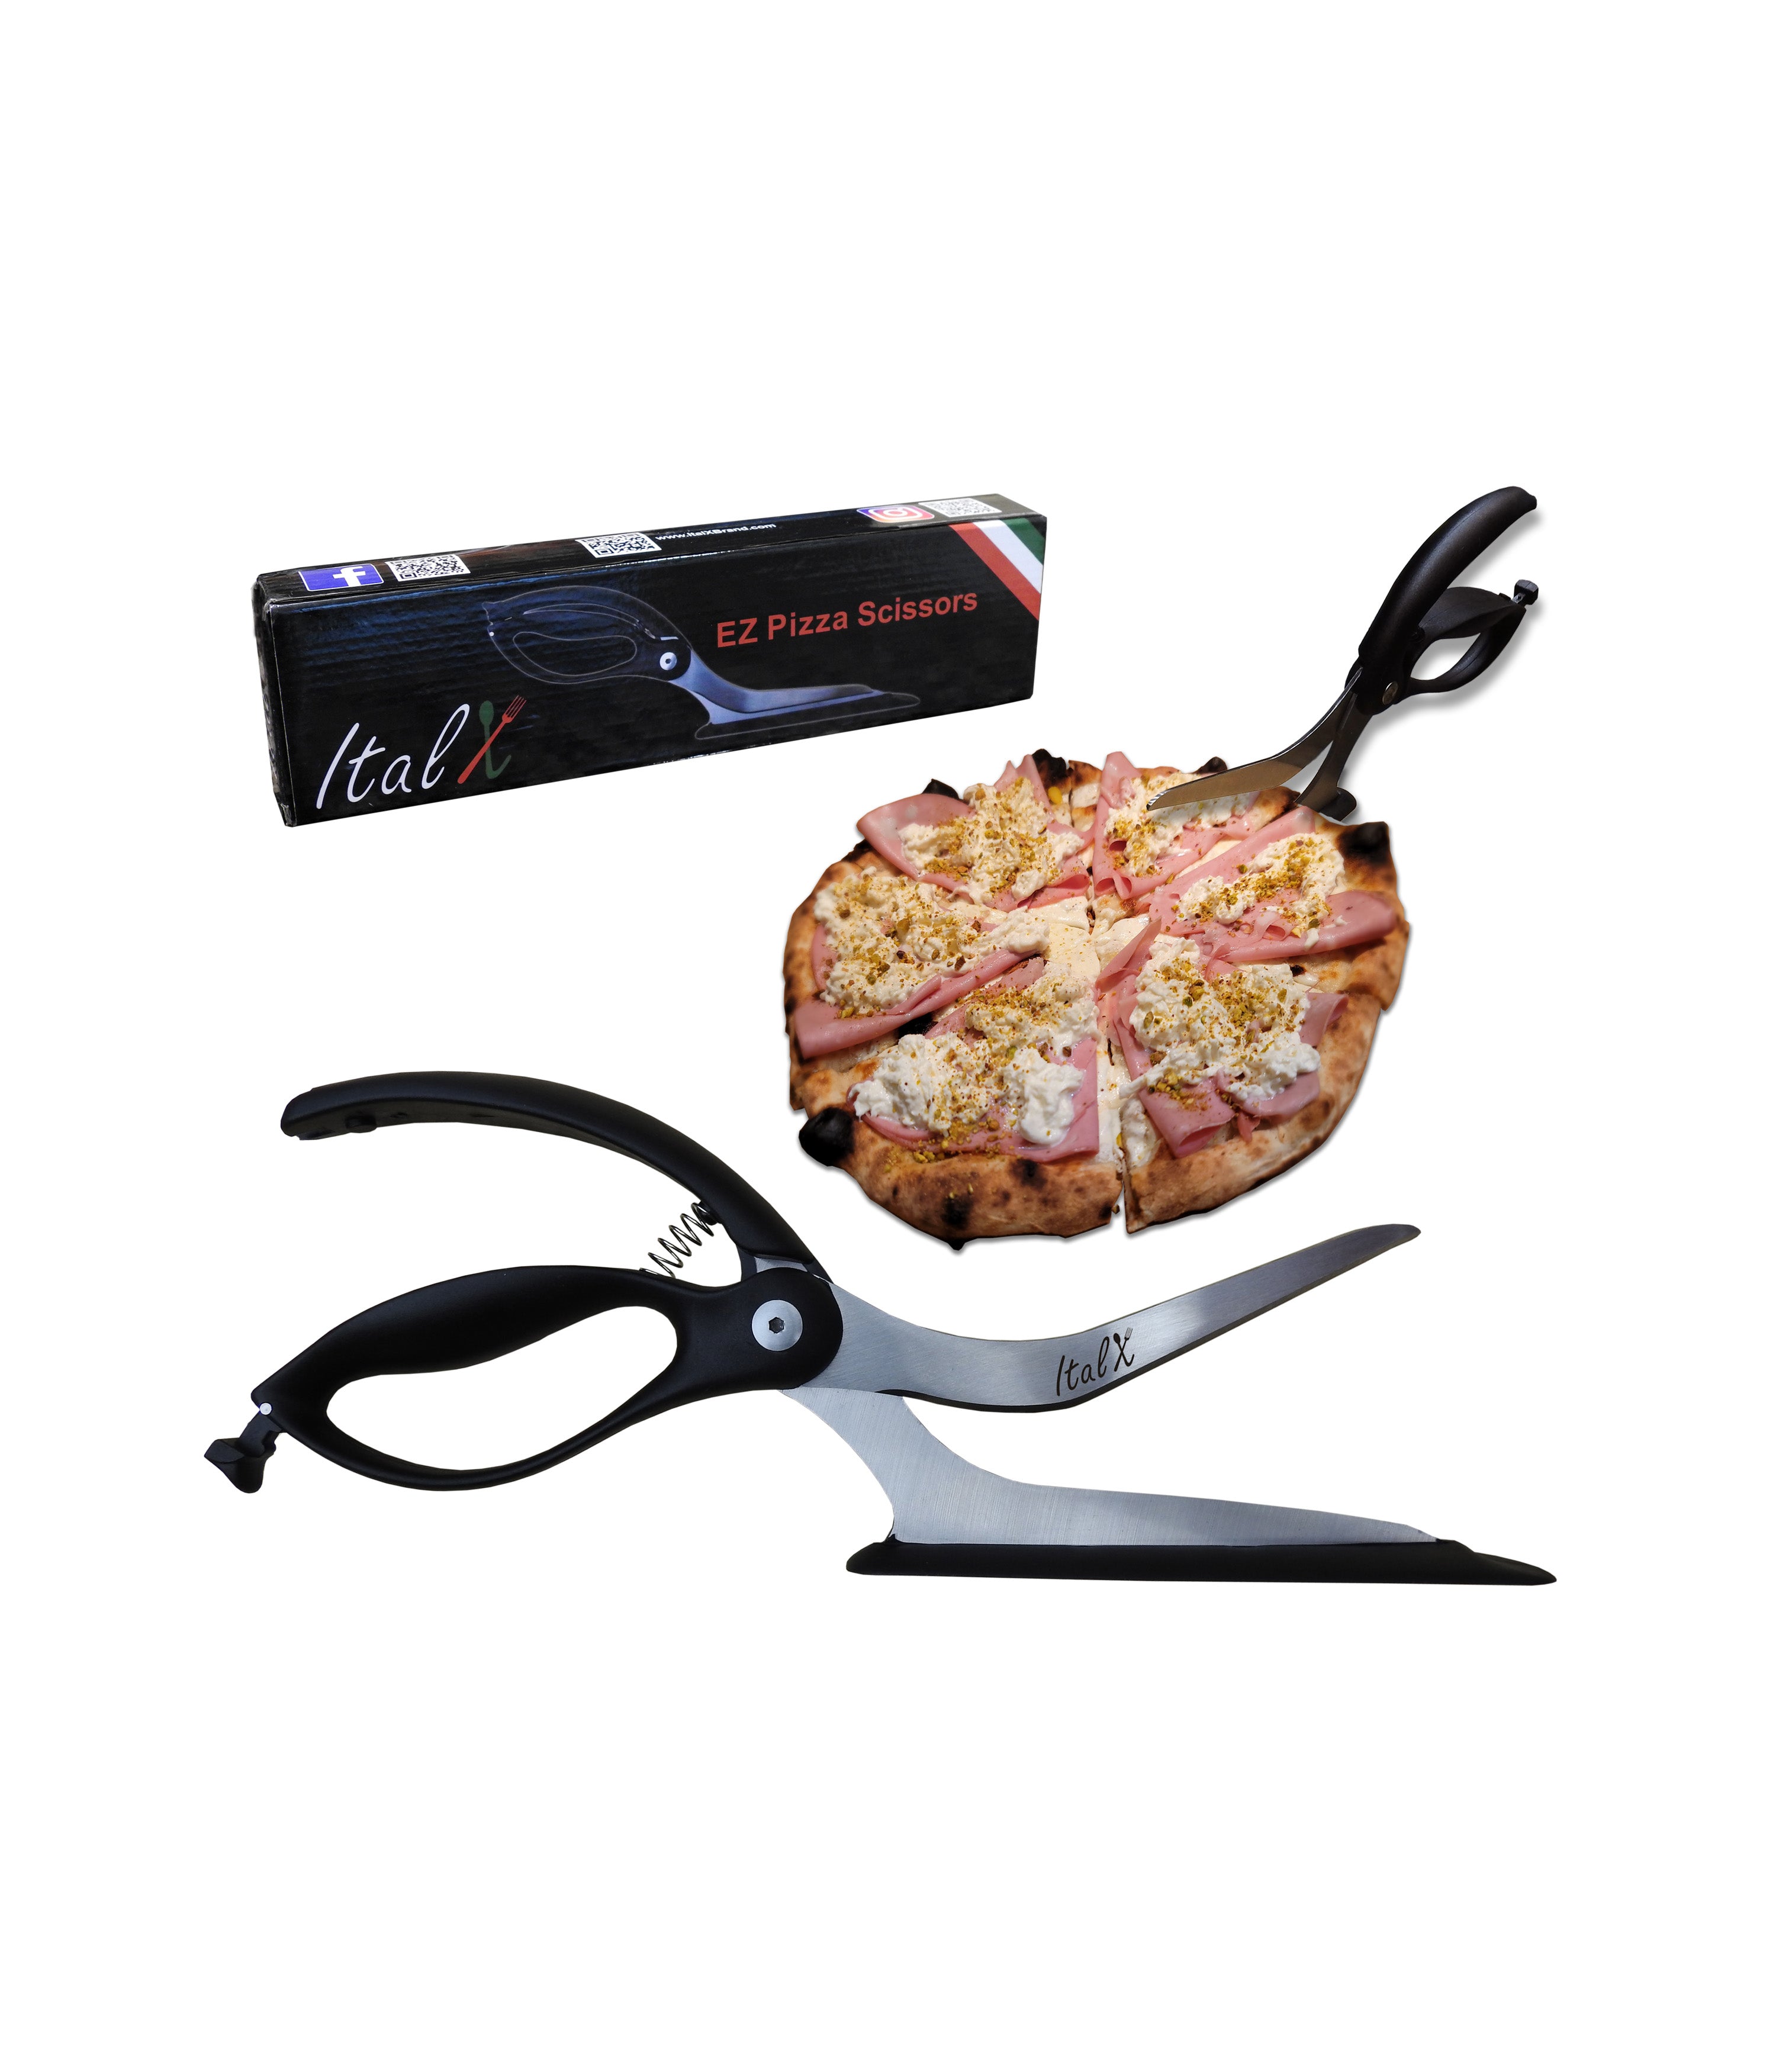 EZ Pizza Scissors - ITALX Stainless Steel Pizza Cutter and Server